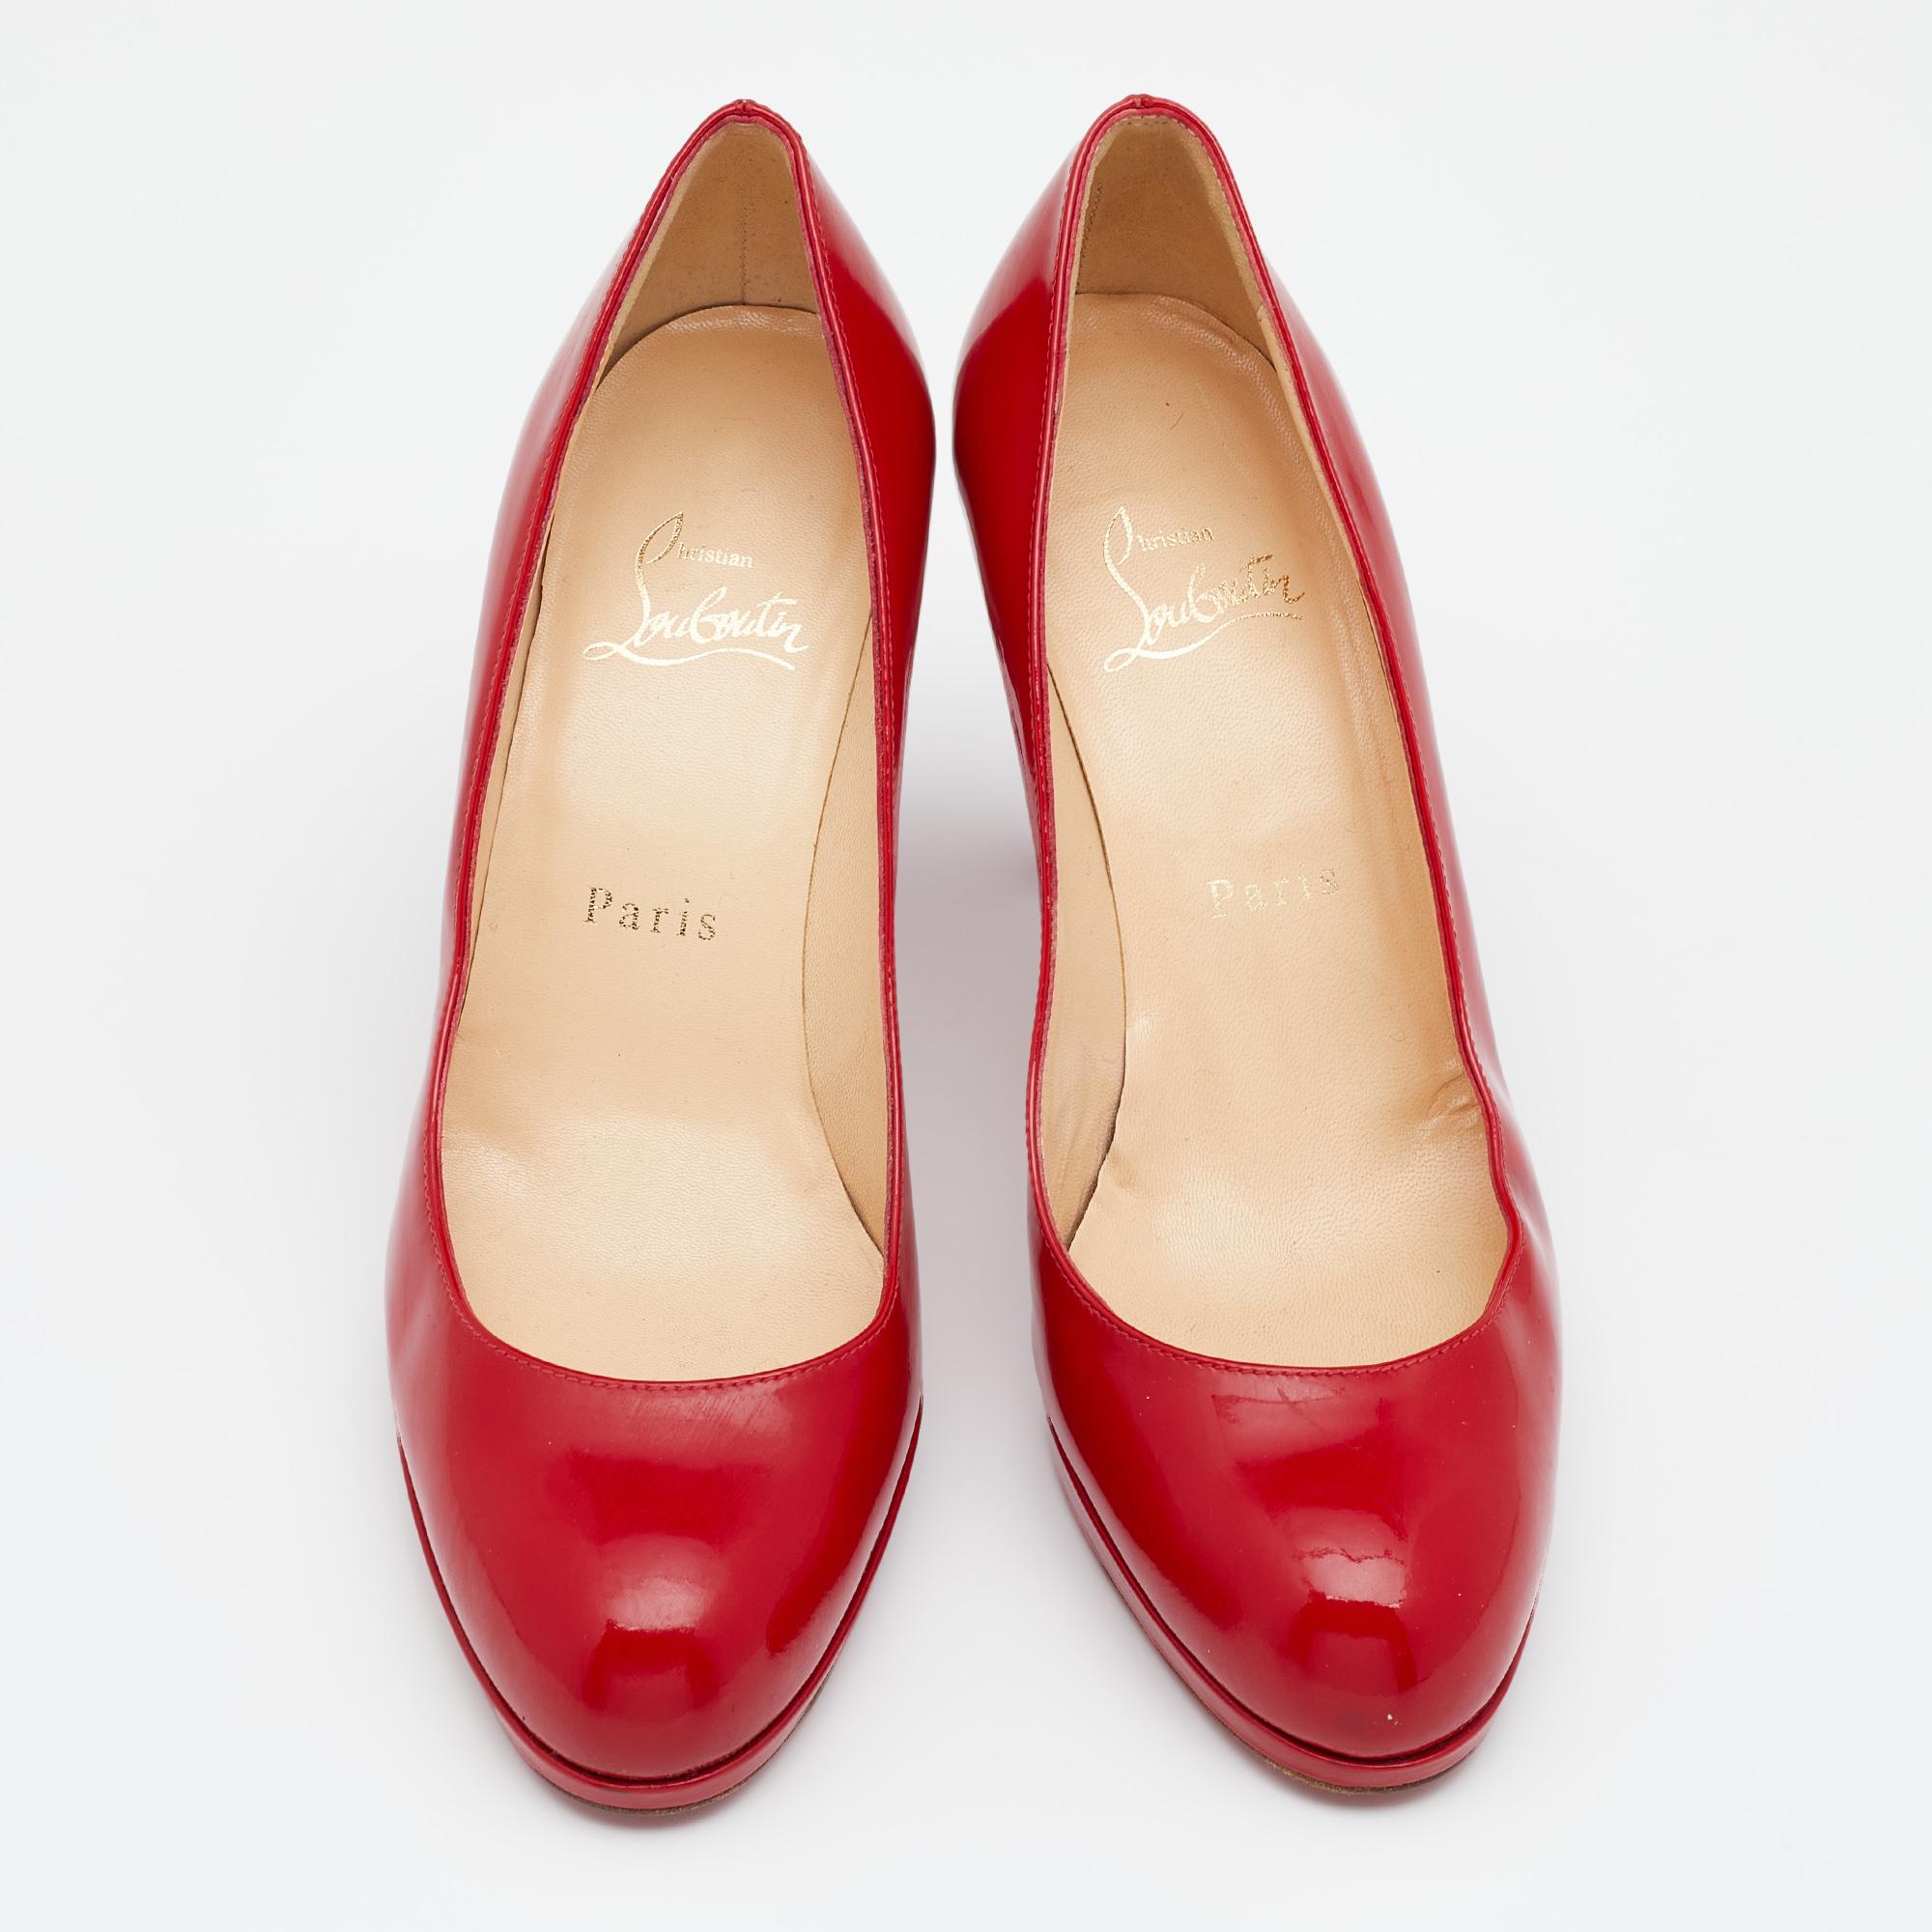 Christian Louboutin Red Patent Leather New Simple Platform Pumps Size 37 In Good Condition For Sale In Dubai, Al Qouz 2